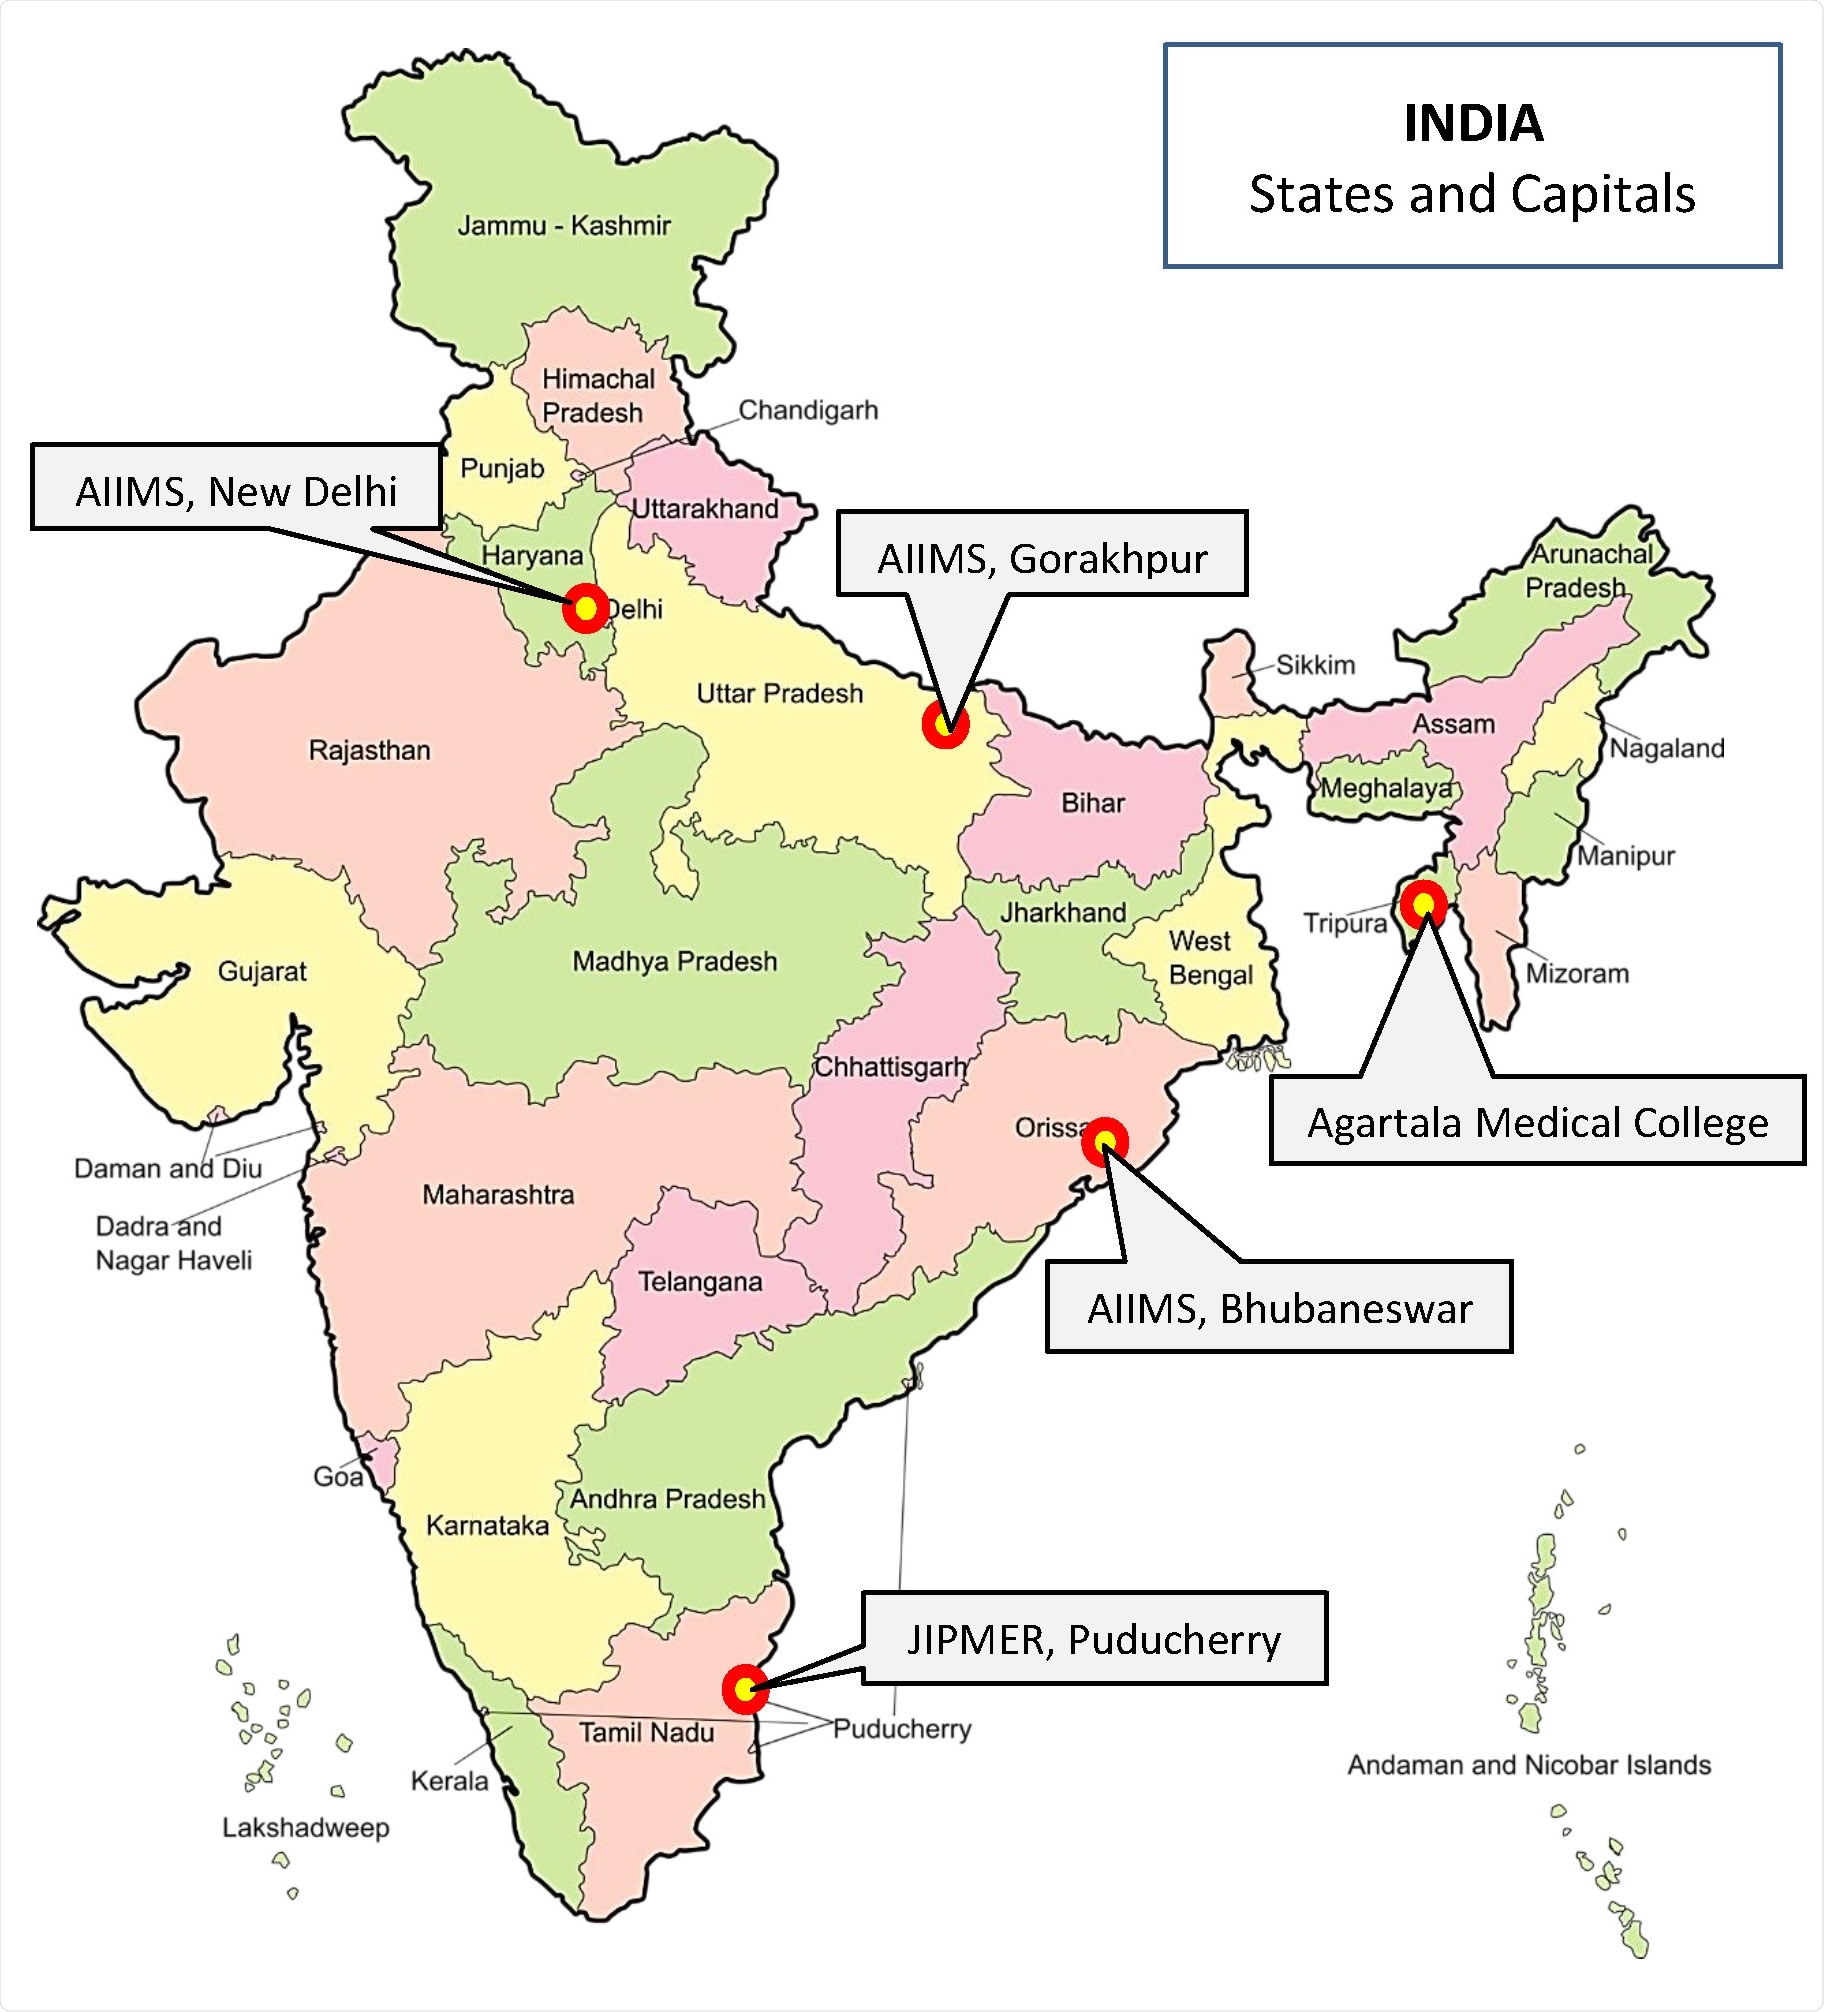 The geographical location of the study sites in India